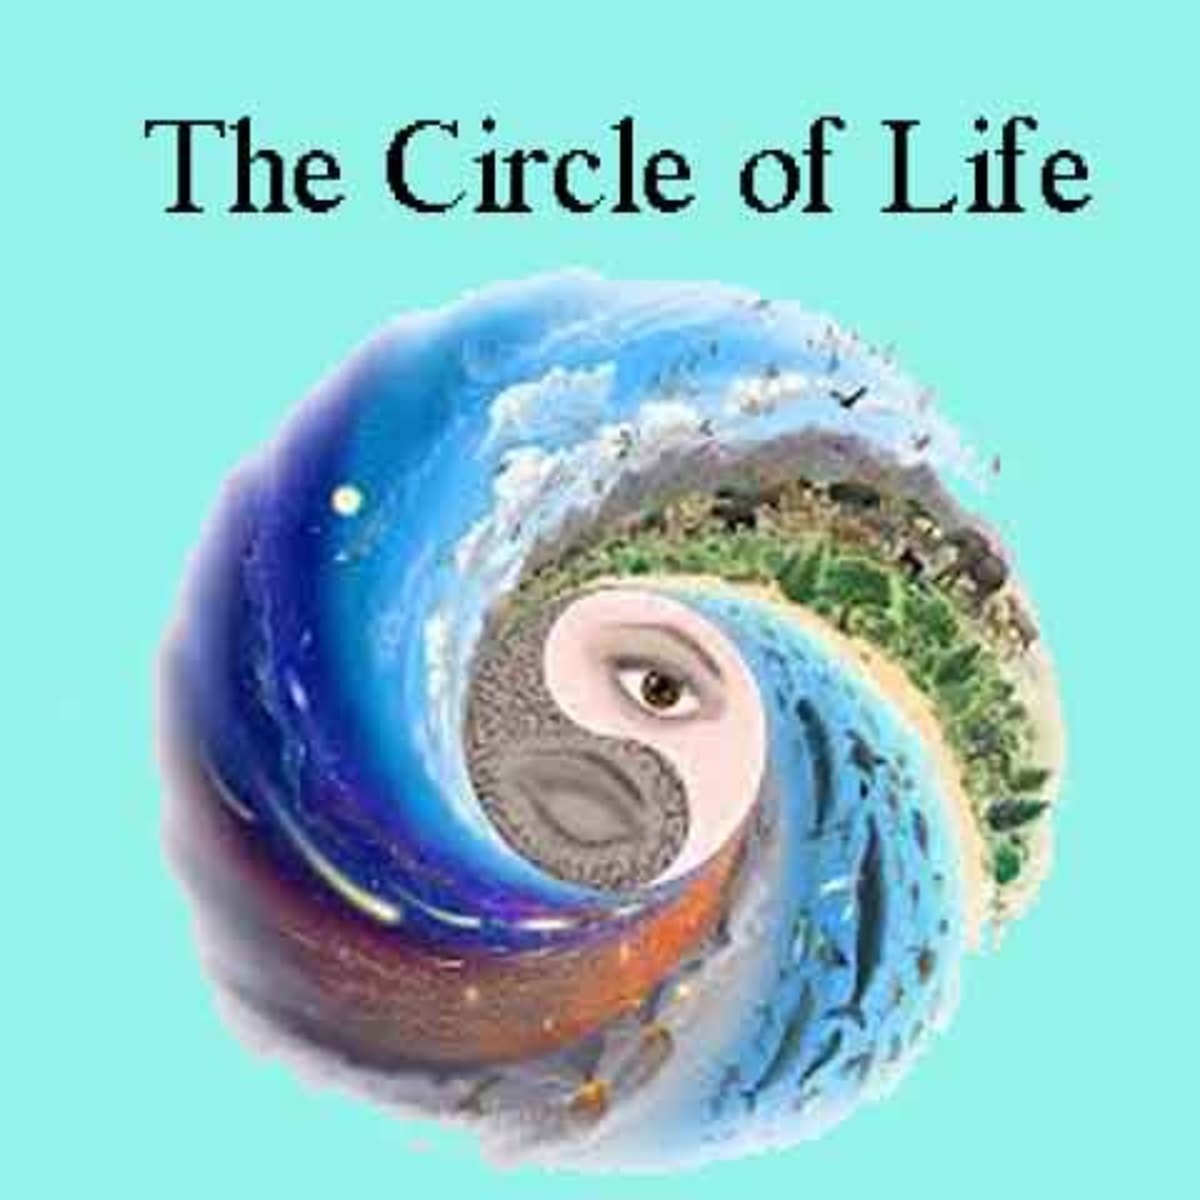 Our Life Is a Complete Circle